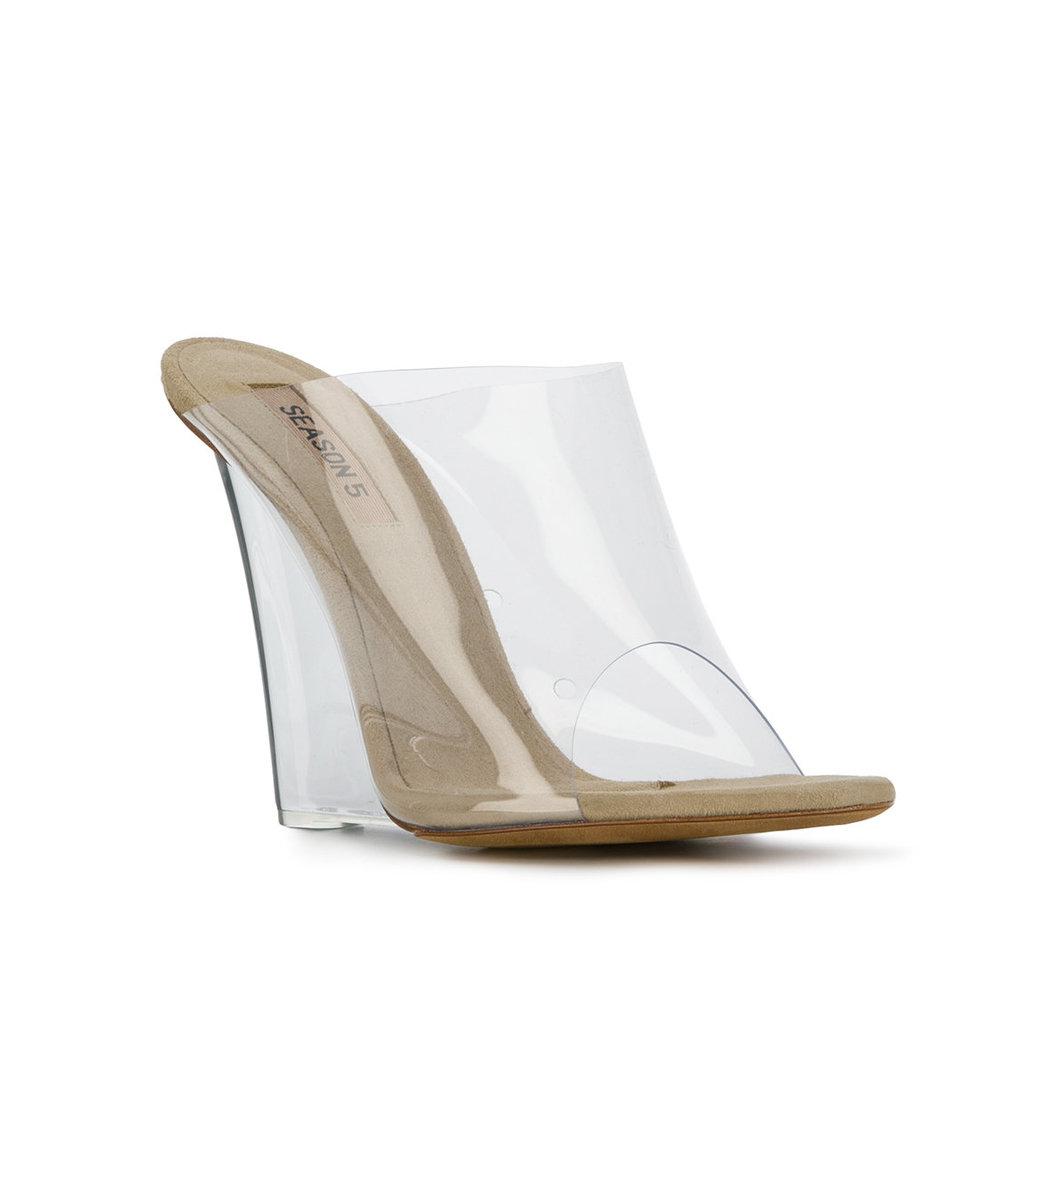 Yeezy Leather Clear Pvc Wedge Mules in Brown - Lyst